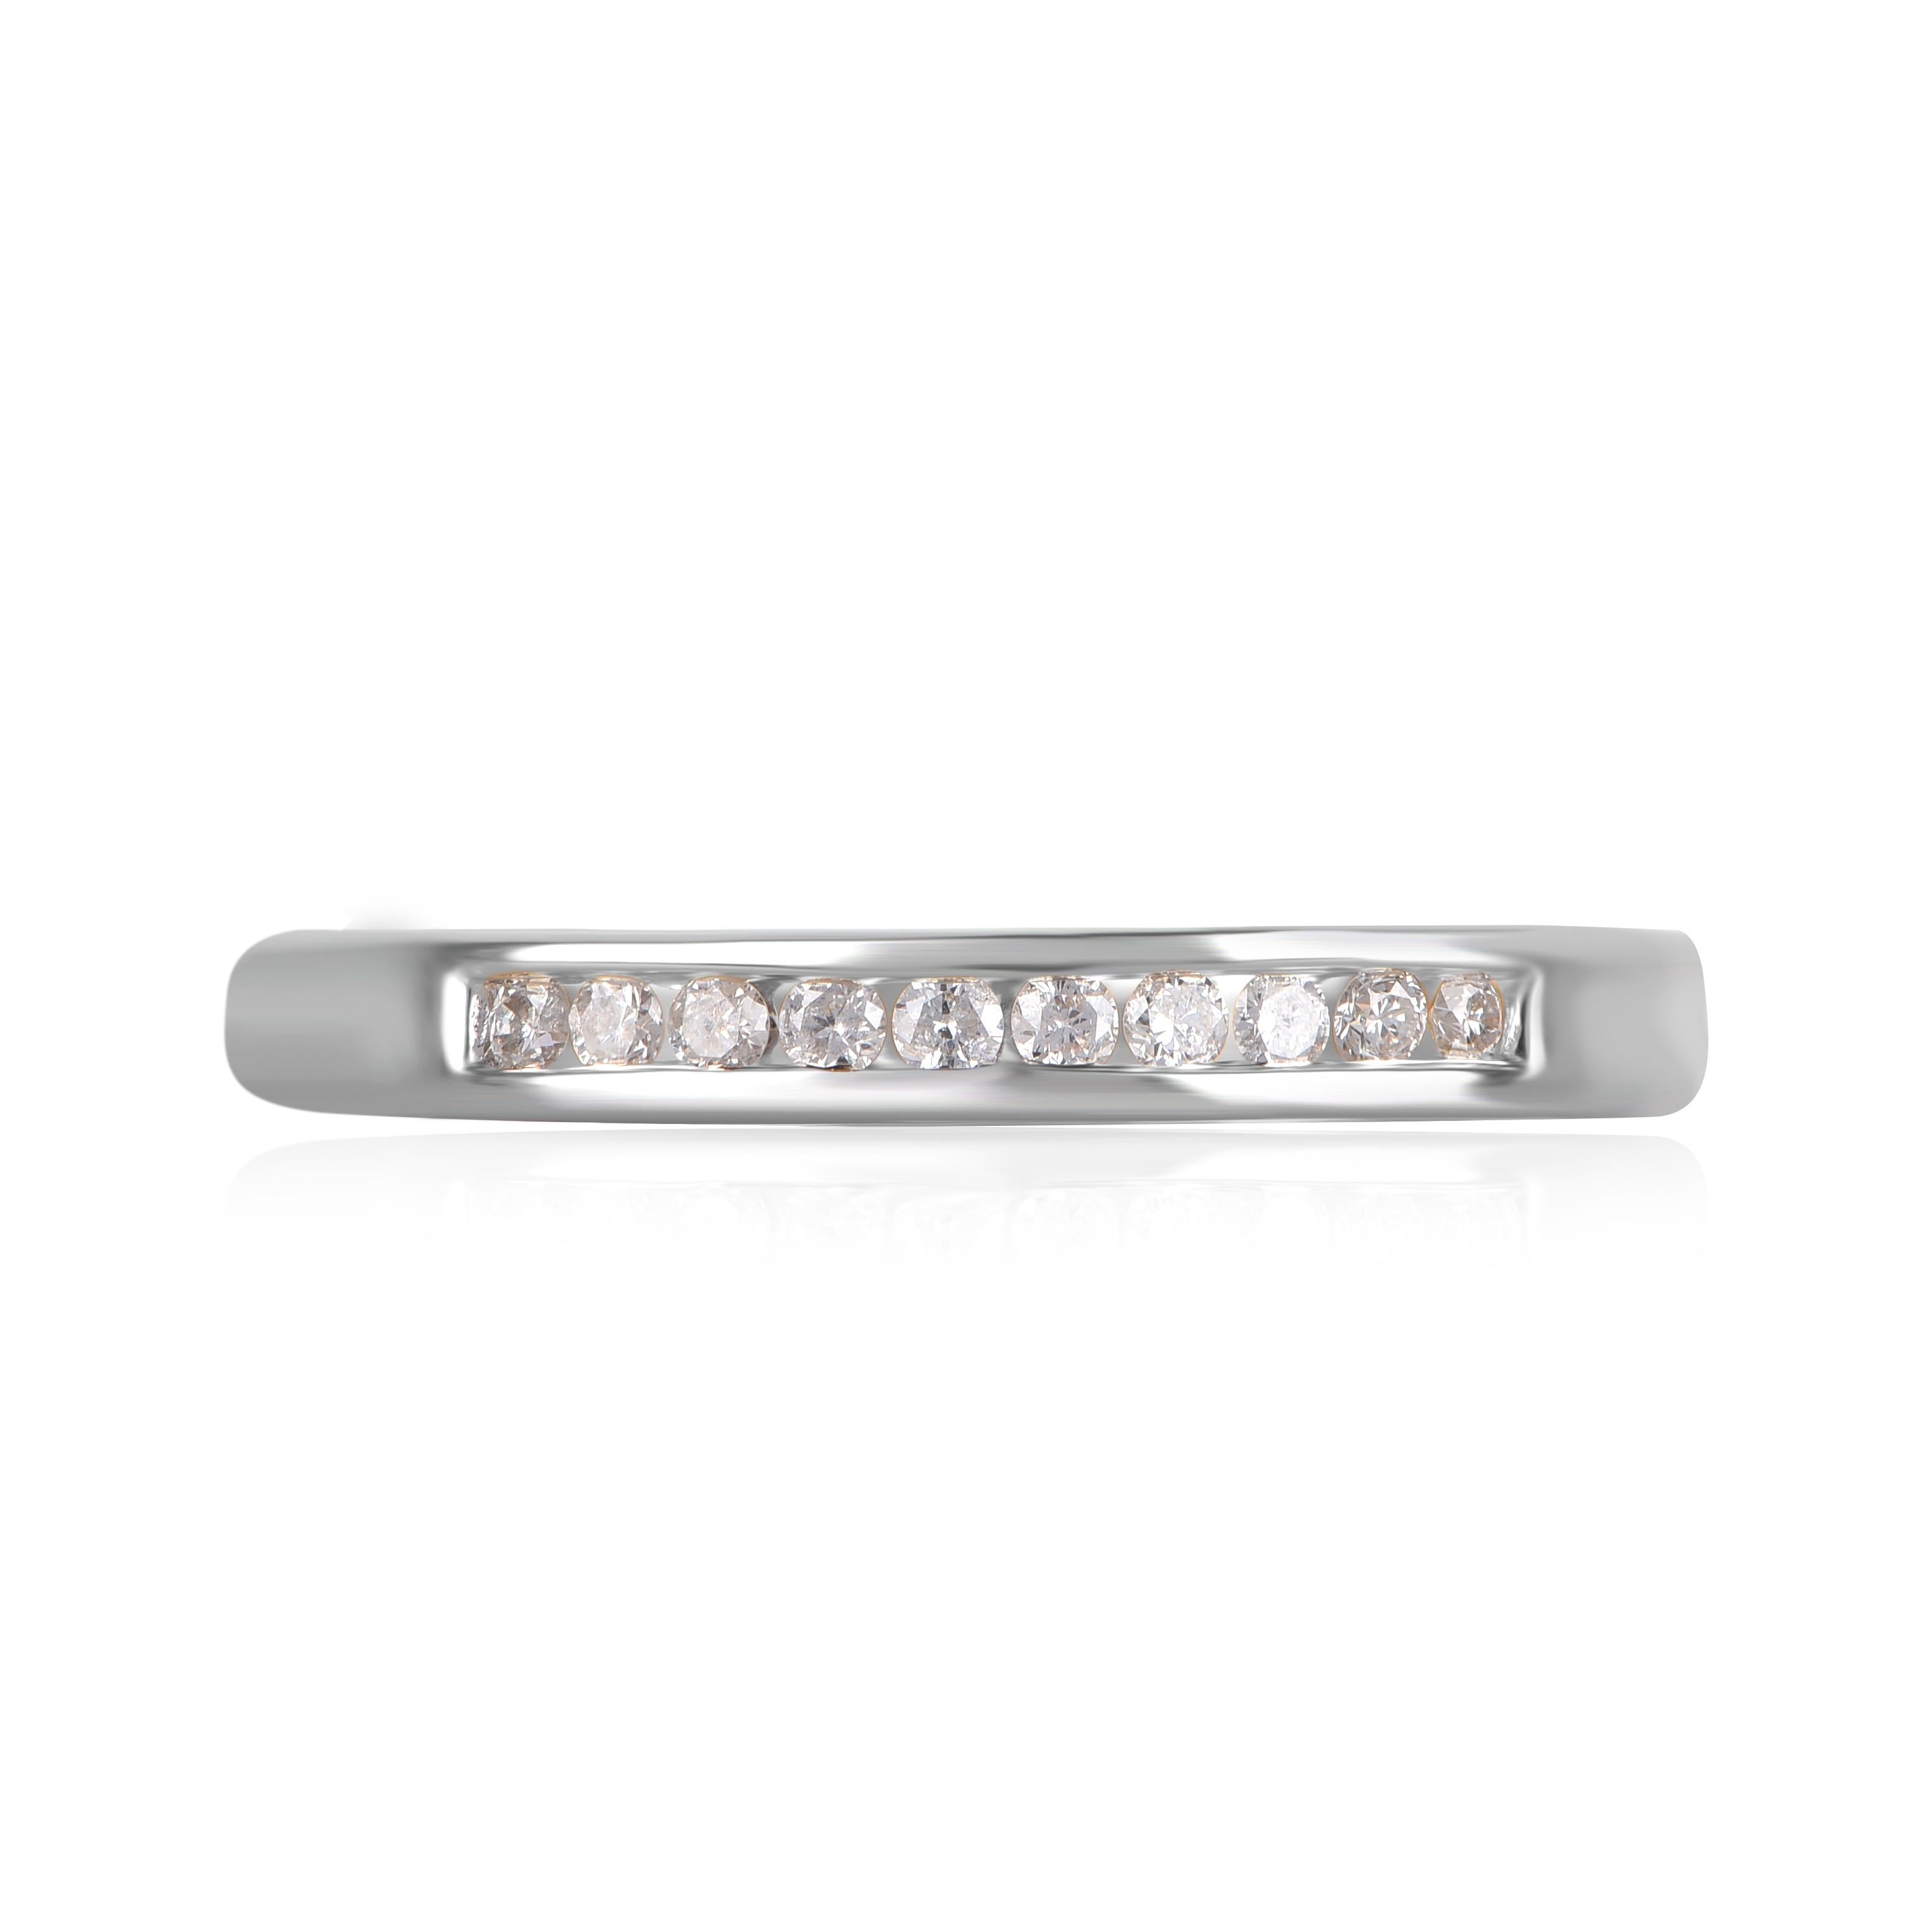 Bring charm to your look with this diamond wedding band Ring. This ring is beautifully crafted in 14 Karat white gold and embedded with 10 natural brilliant cut diamonds in channel setting. Total diamond weight is 0.15 carat. The diamonds are graded